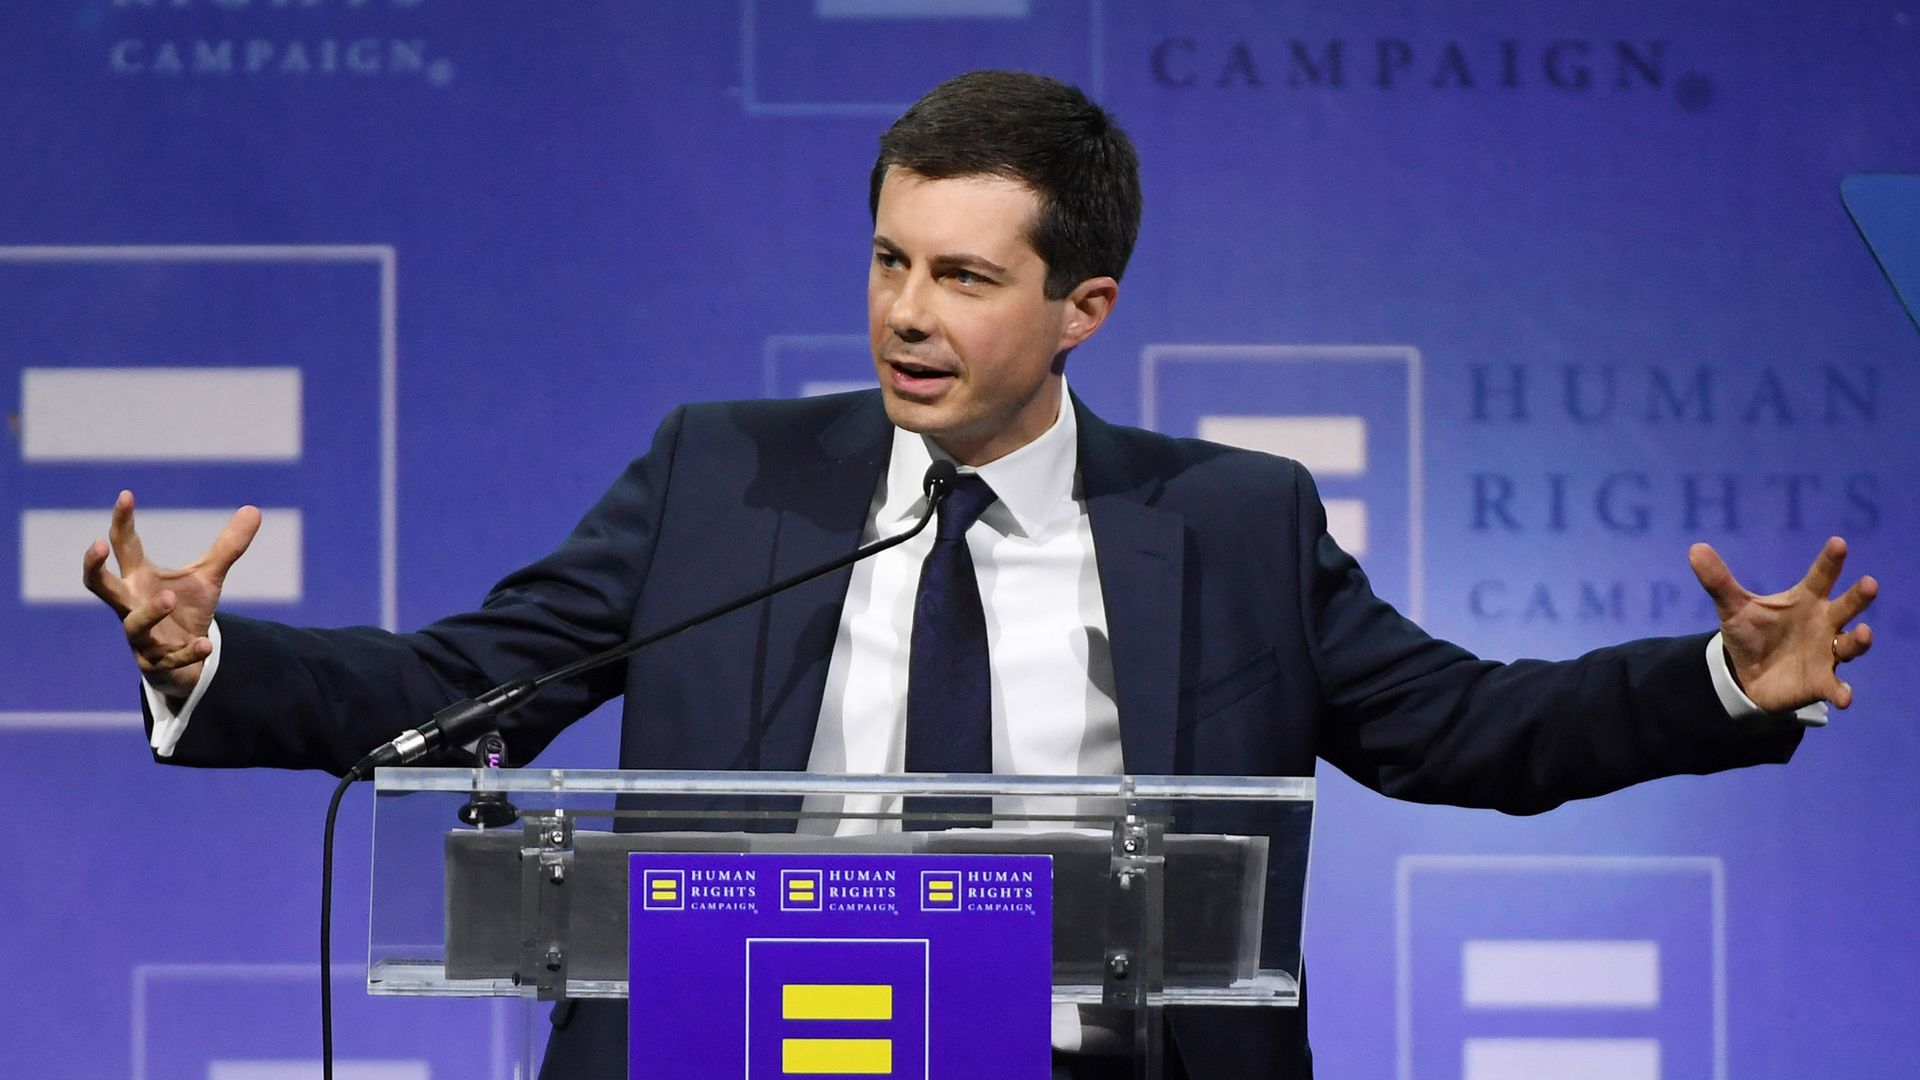  South Bend, Indiana Mayor Pete Buttigieg delivers a keynote address at the Human Rights Campaign's (HRC) 14th annual Las Vegas Gala at Caesars Palace on May 11.